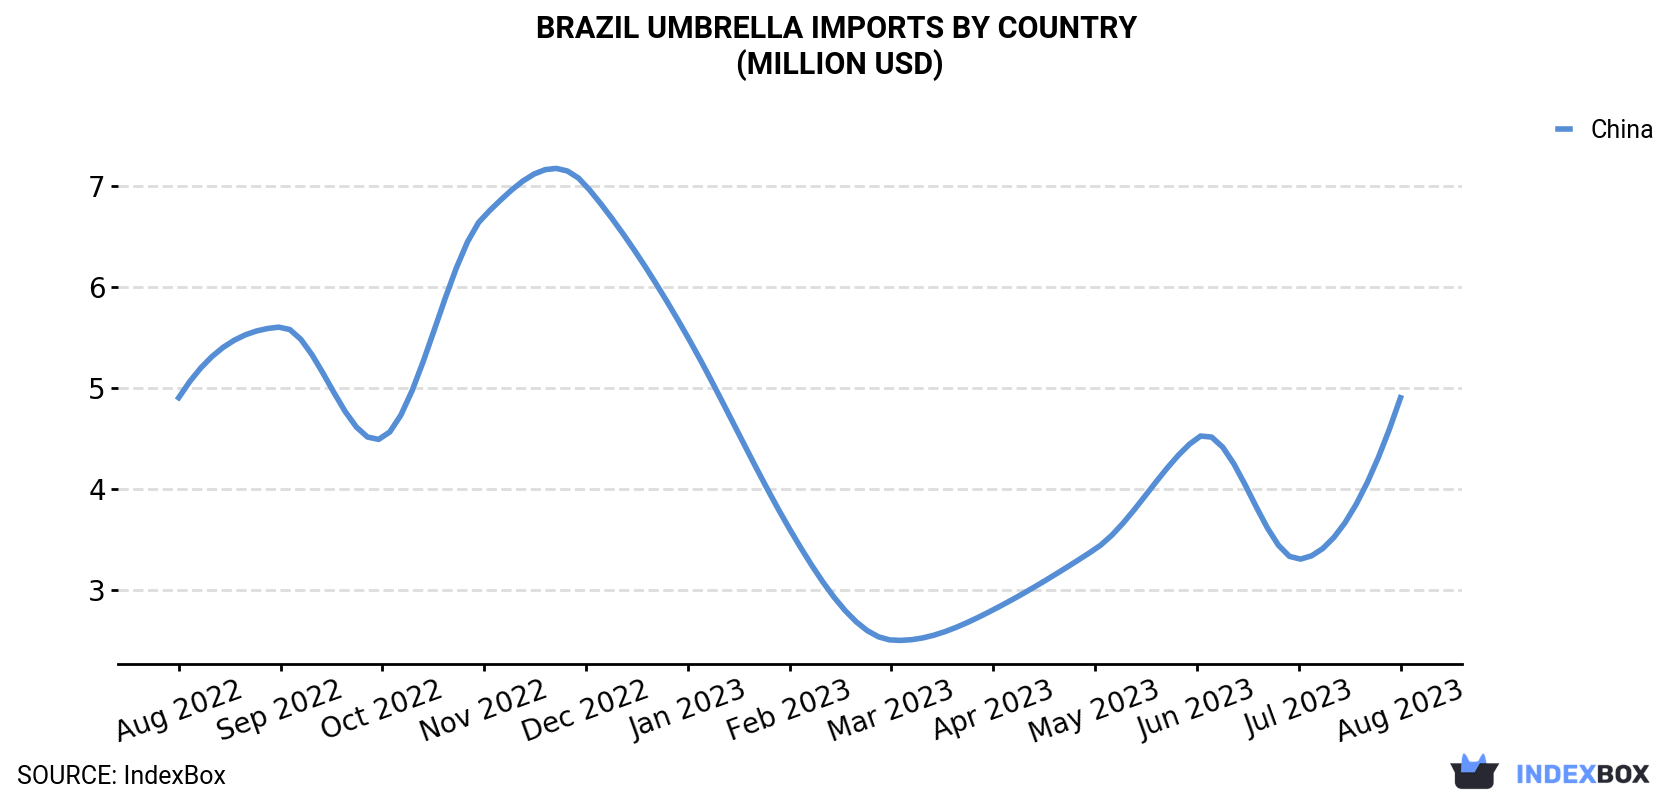 Brazil Umbrella Imports By Country (Million USD)